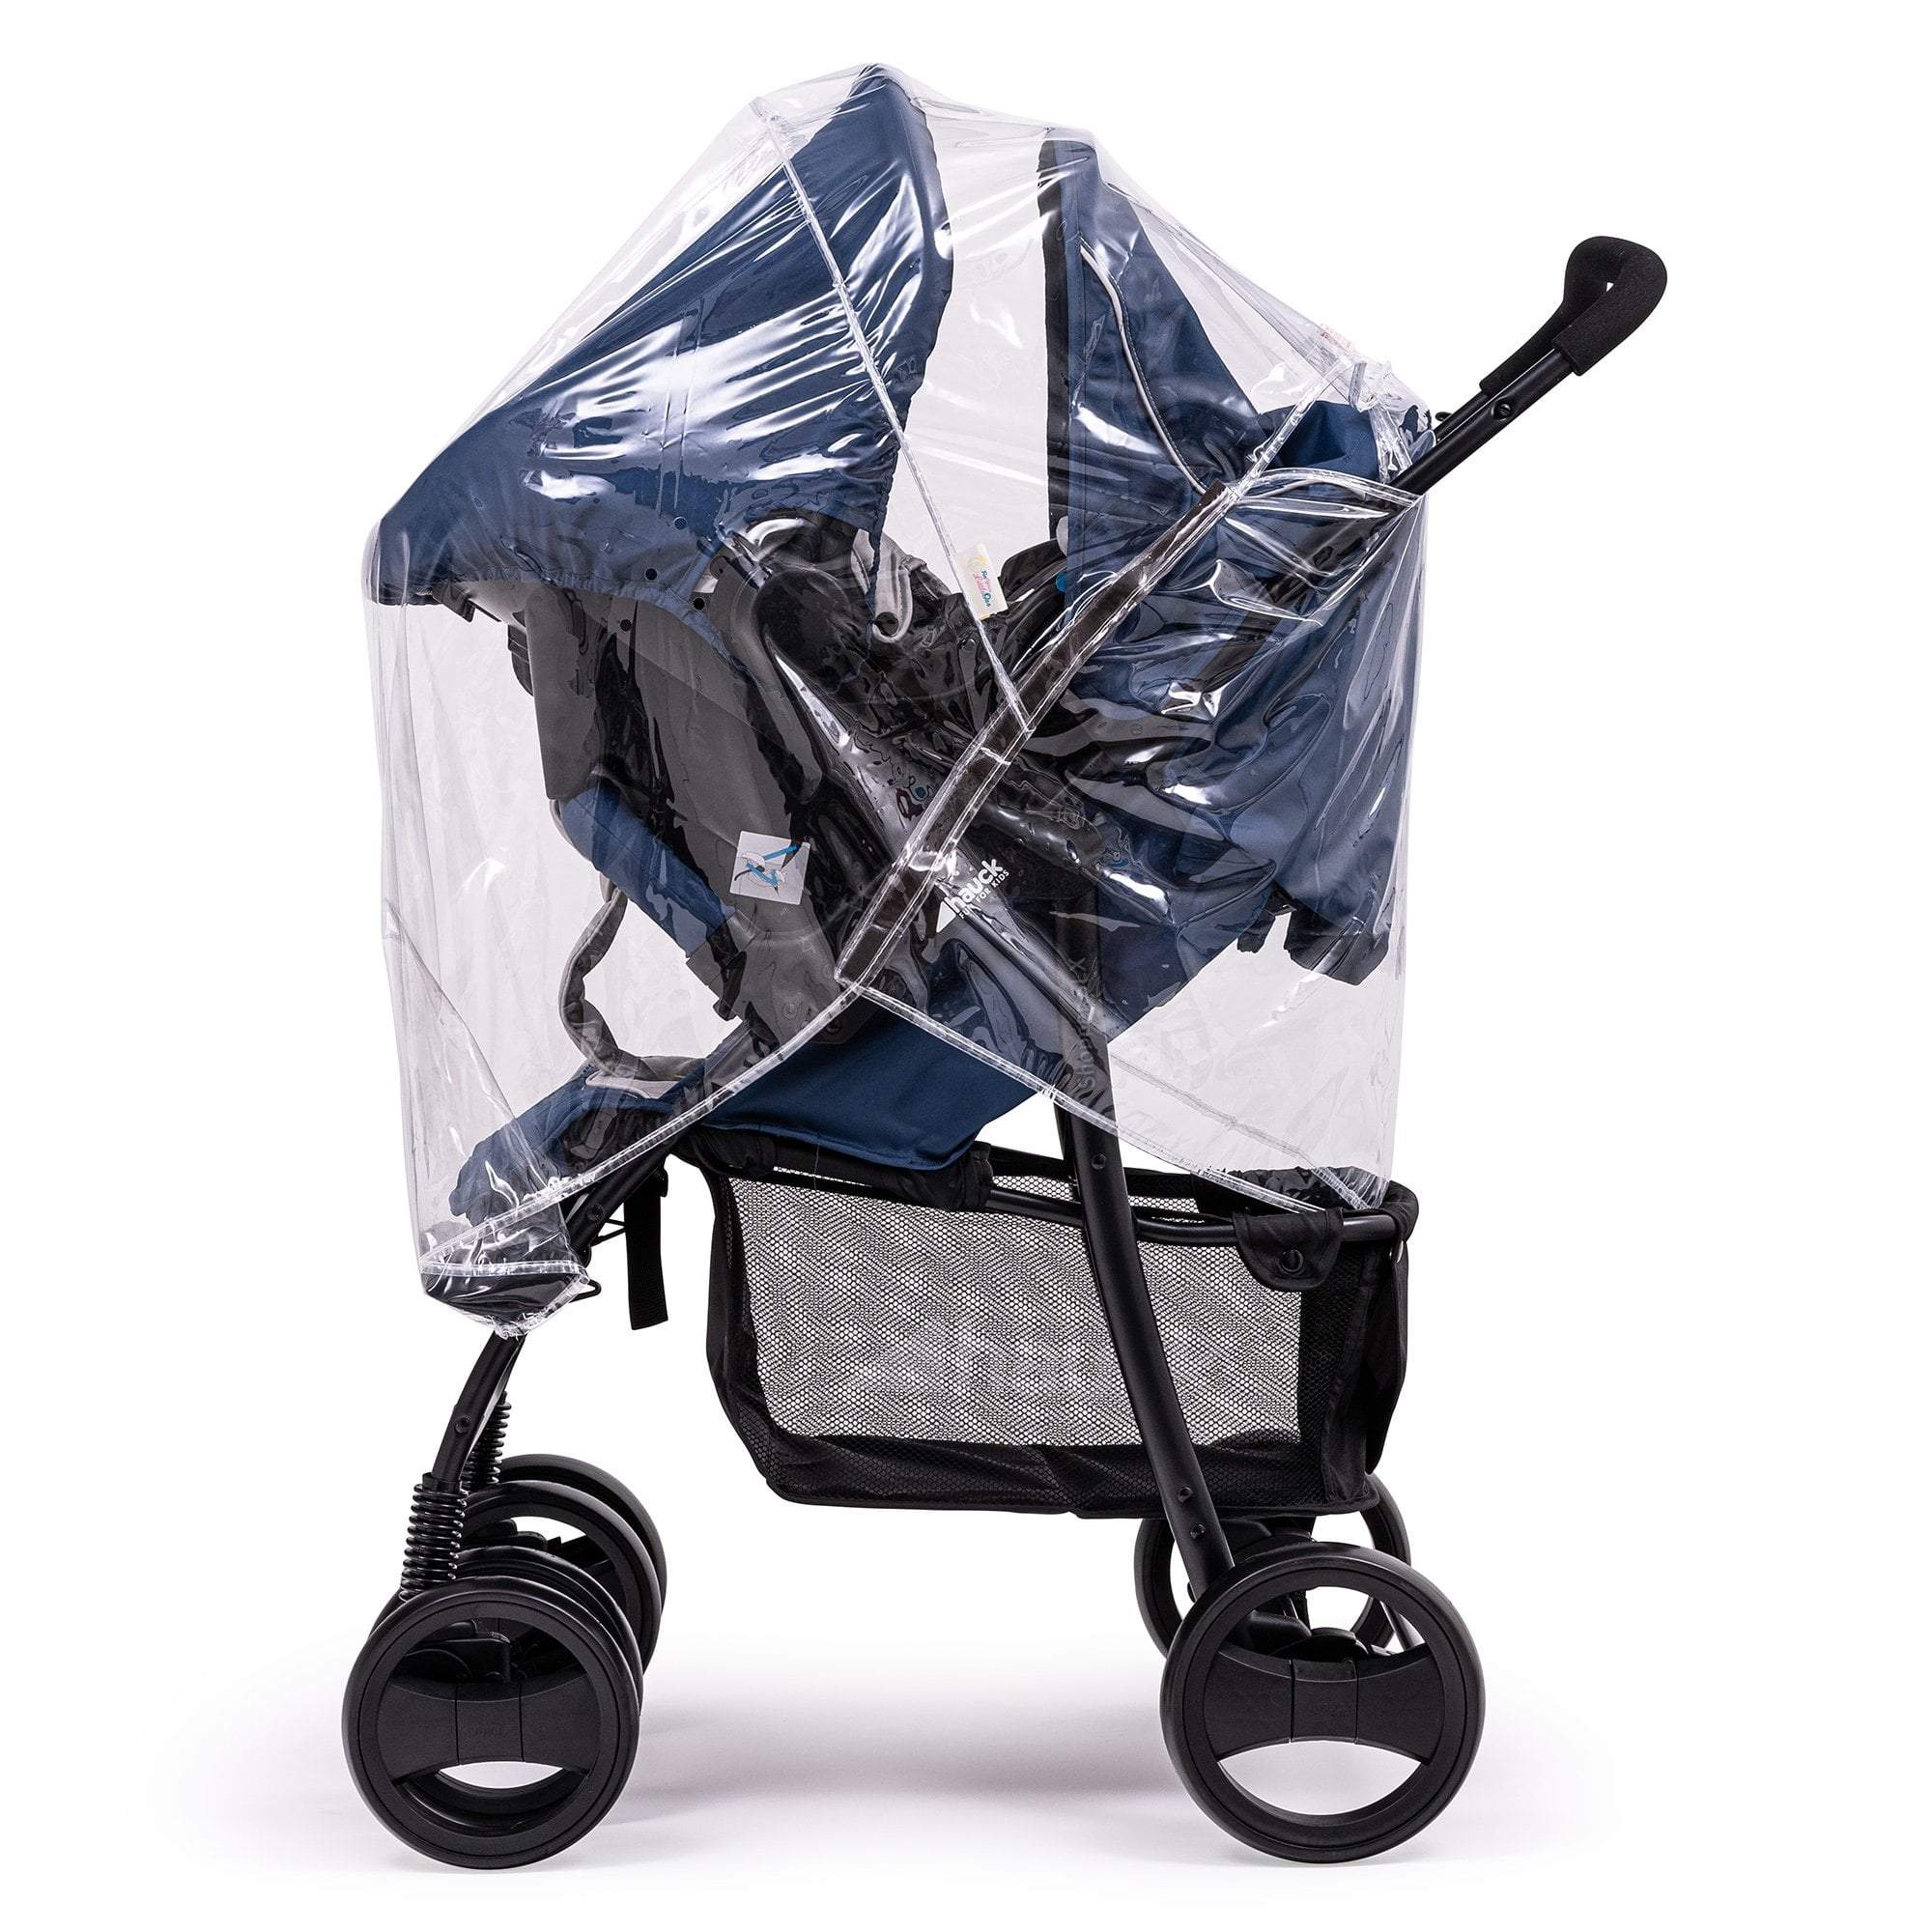 Travel System Raincover Compatible with Quinny - Fits All Models - For Your Little One